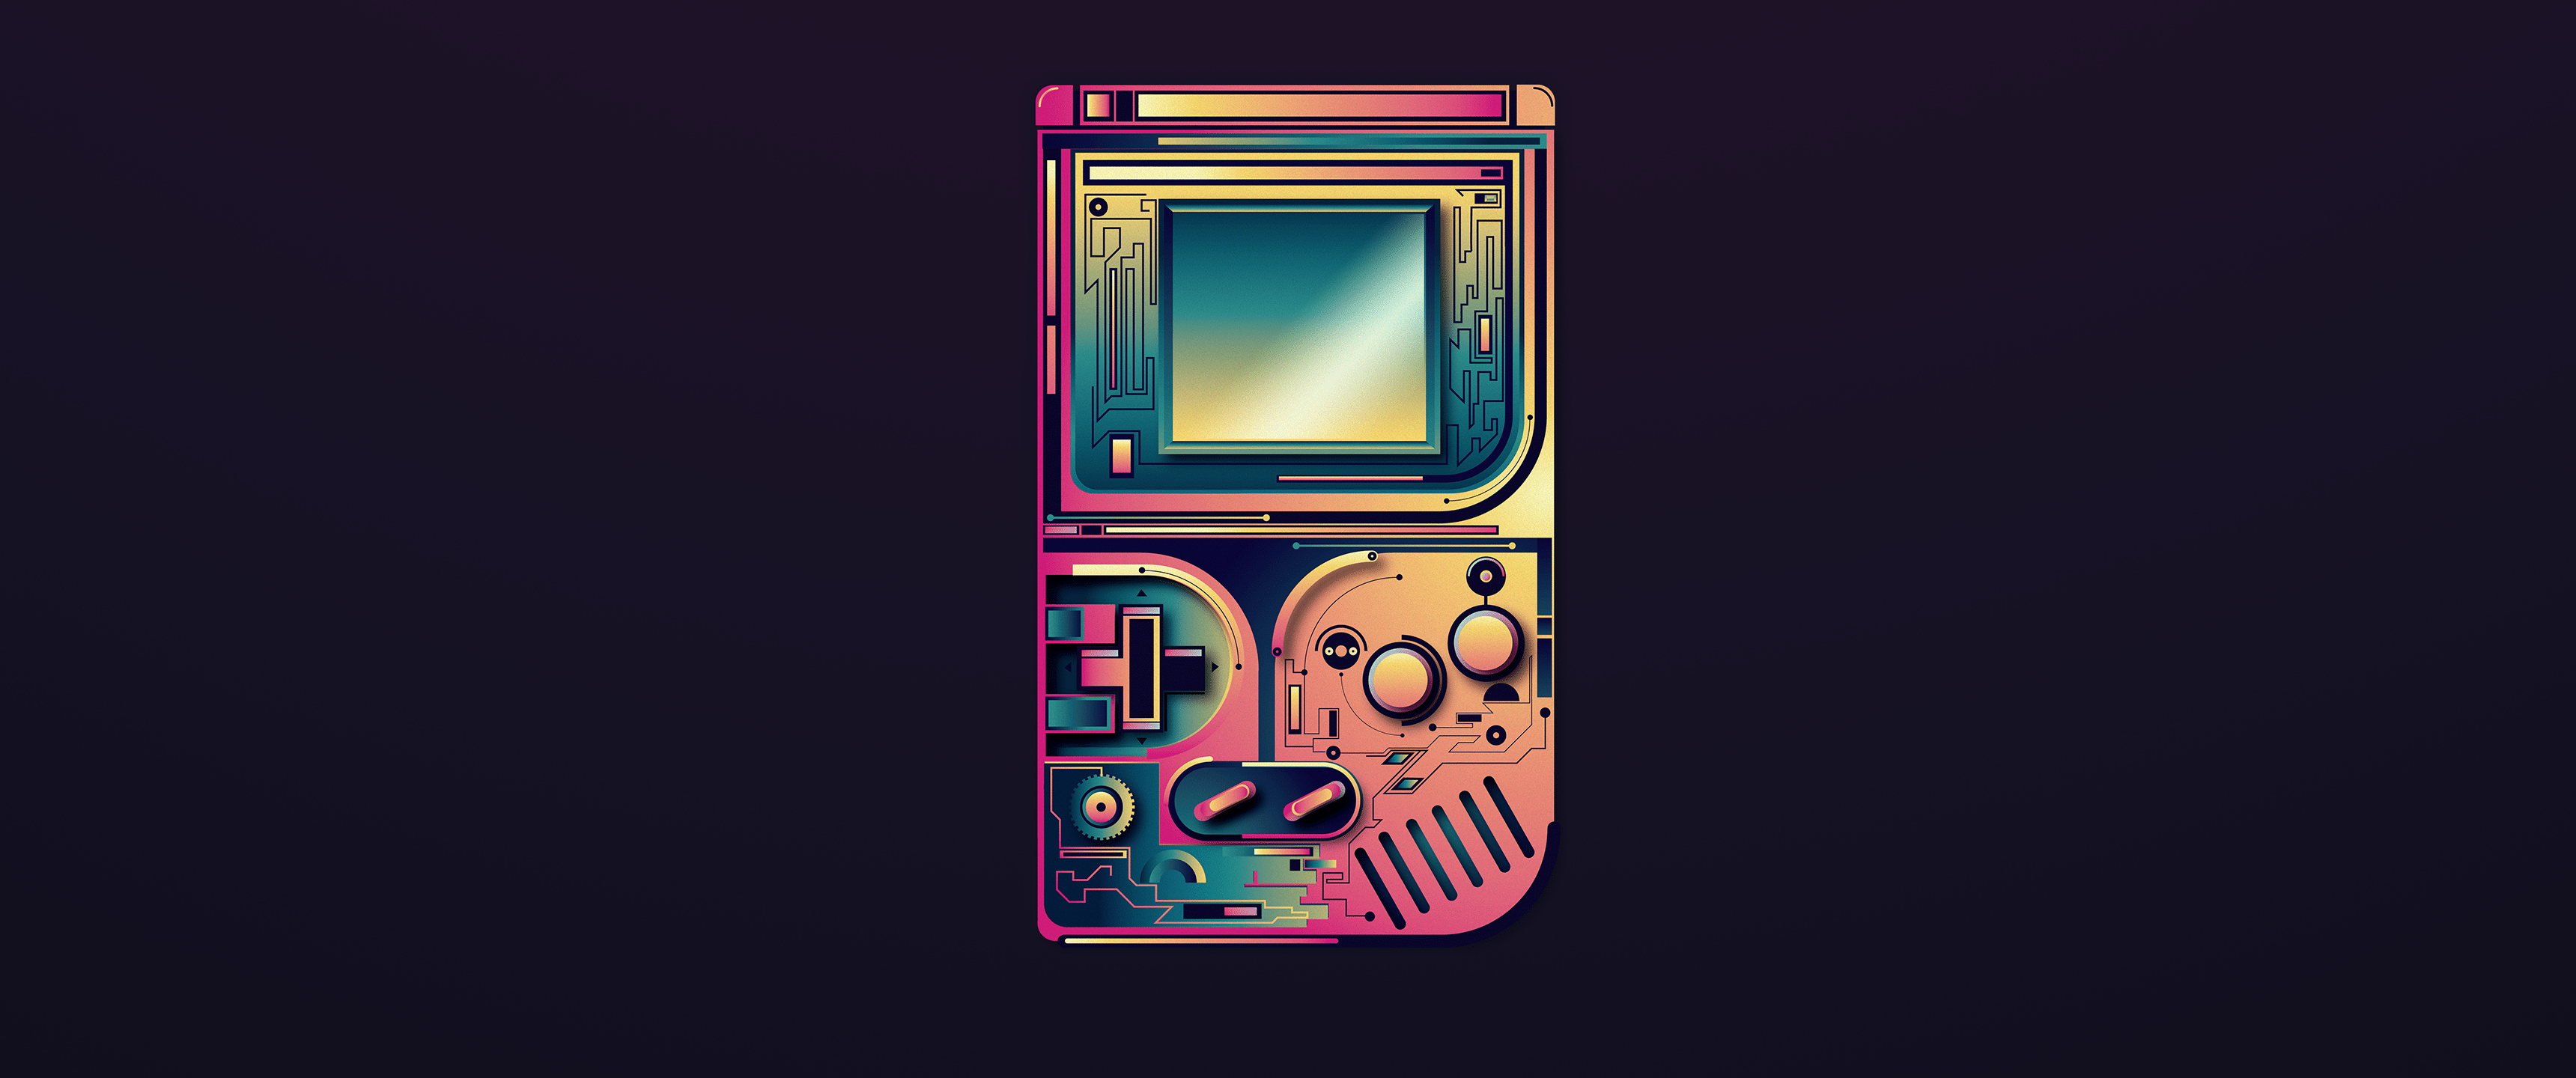 GameBoy Colorful Wallpaper:3440x1440